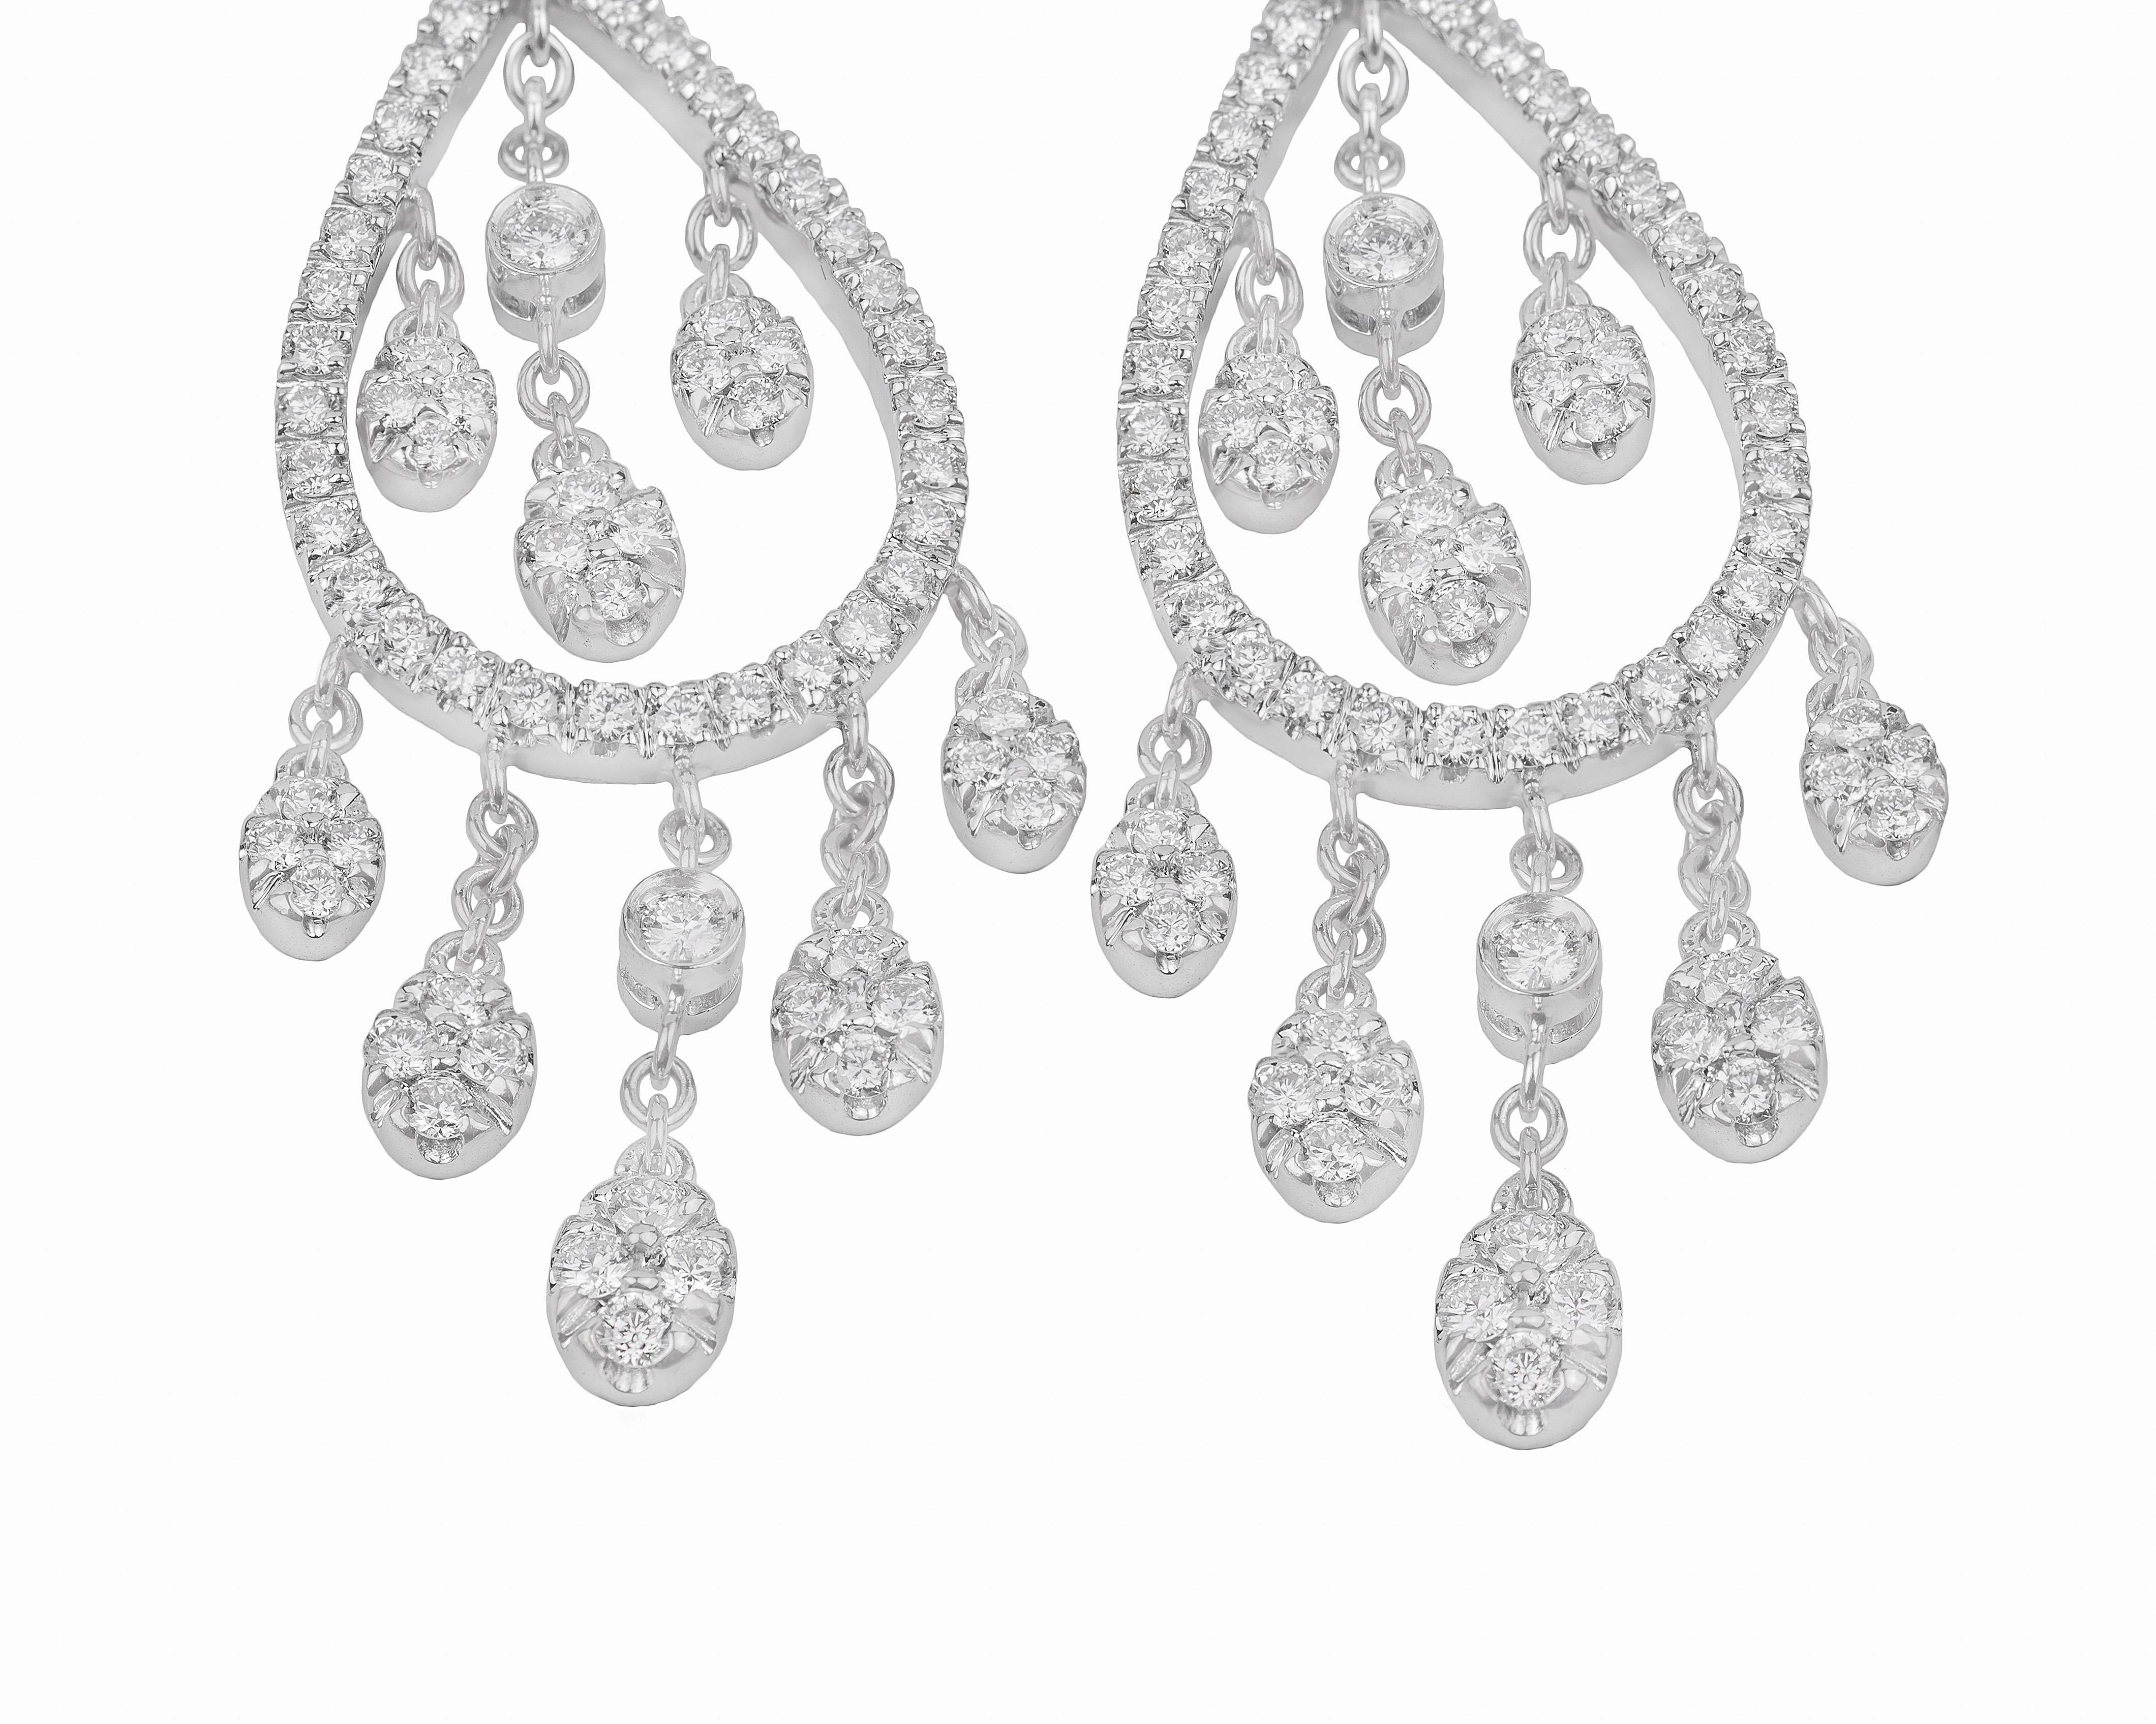 These elegant and bright 18K white gold earrings are made in Italy by Fanuele Gioielli.
They feature a lever-back closure and a drop shape. These earrings are entirely made of white gold and brilliant cut white diamonds.

Diamonds total content is